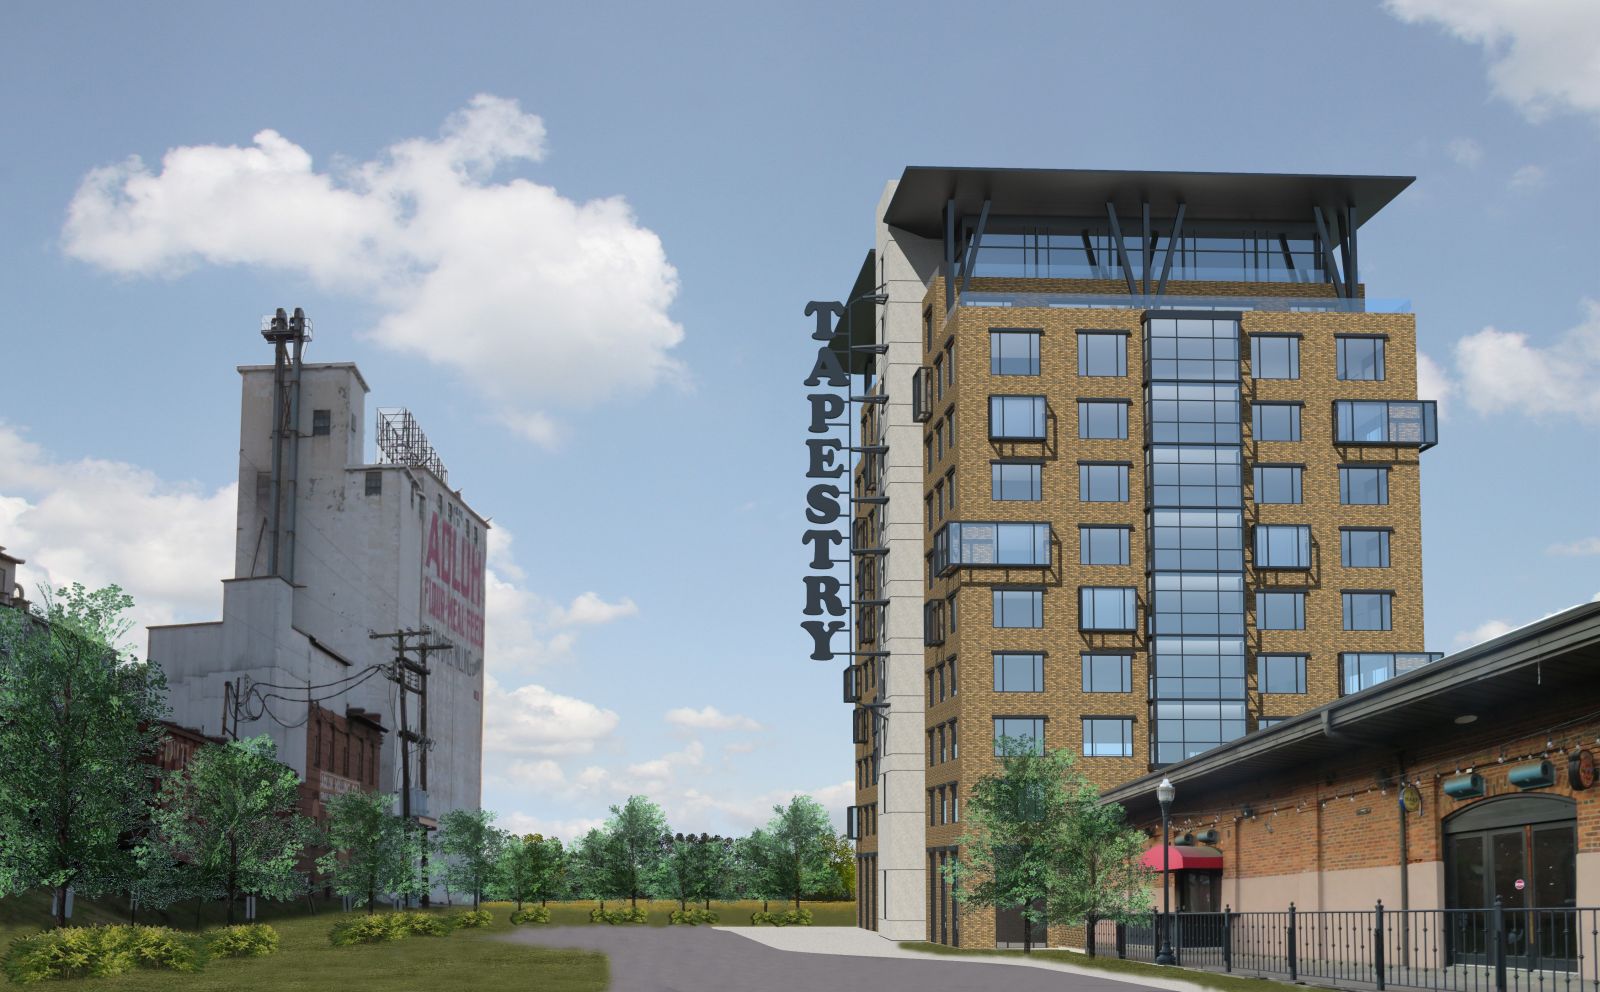 A rendering of the proposed Hotel Anthem at 800 Gervais St., an 11-story hotel that would be part of the Hilton Tapestry boutique brand. (Rendering provided by Kollin Altomare Architects)